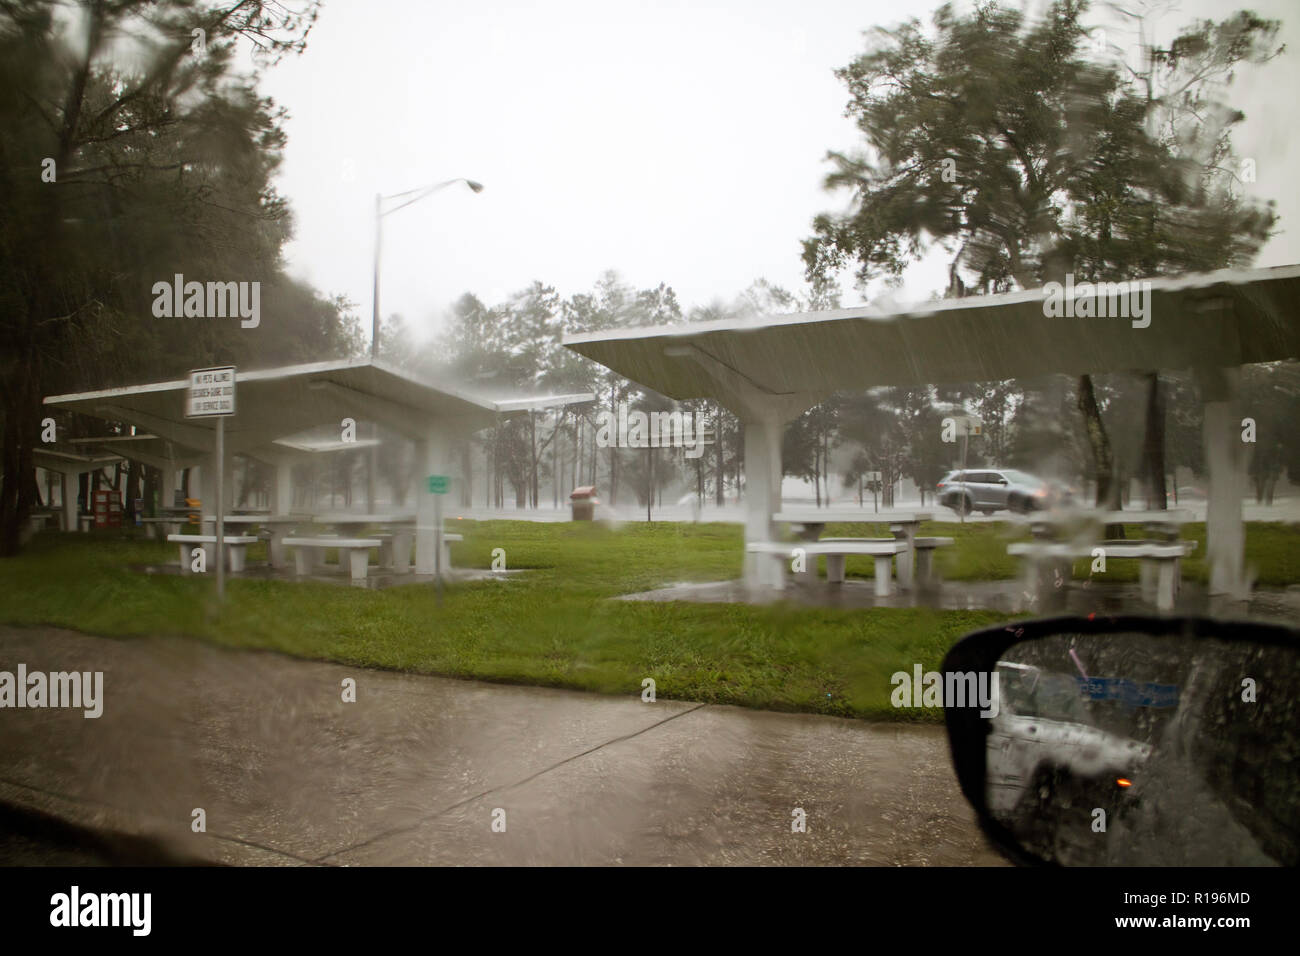 Heavy downpour of rain seen from car interior on an American reststop in Florida. Stock Photo